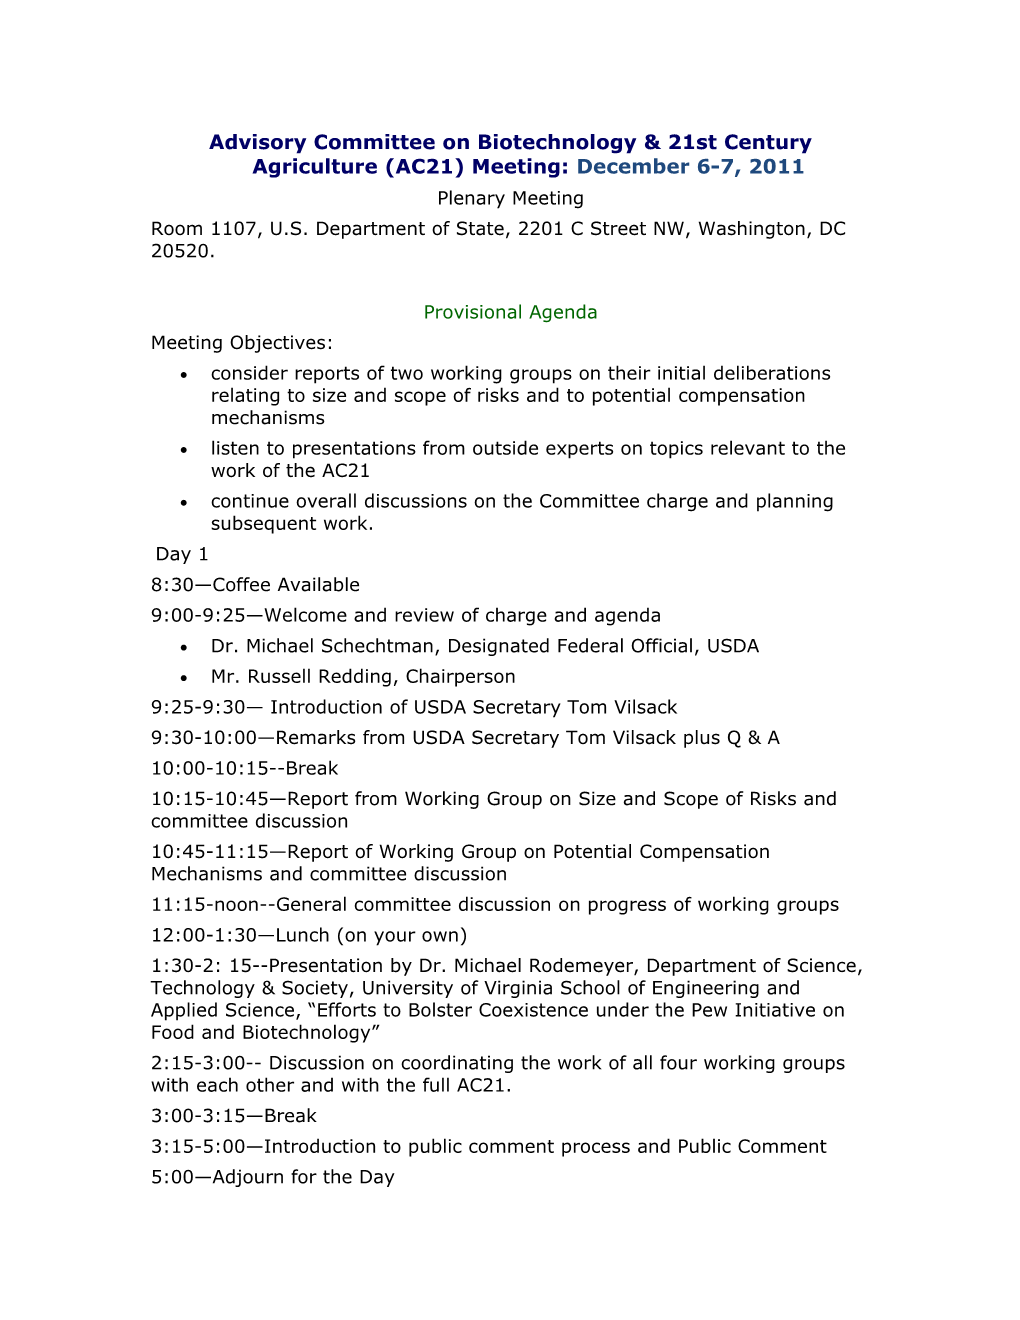 Advisory Committee On Biotechnology & 21St Century Agriculture (AC21) Meeting: December 6-7, 2011